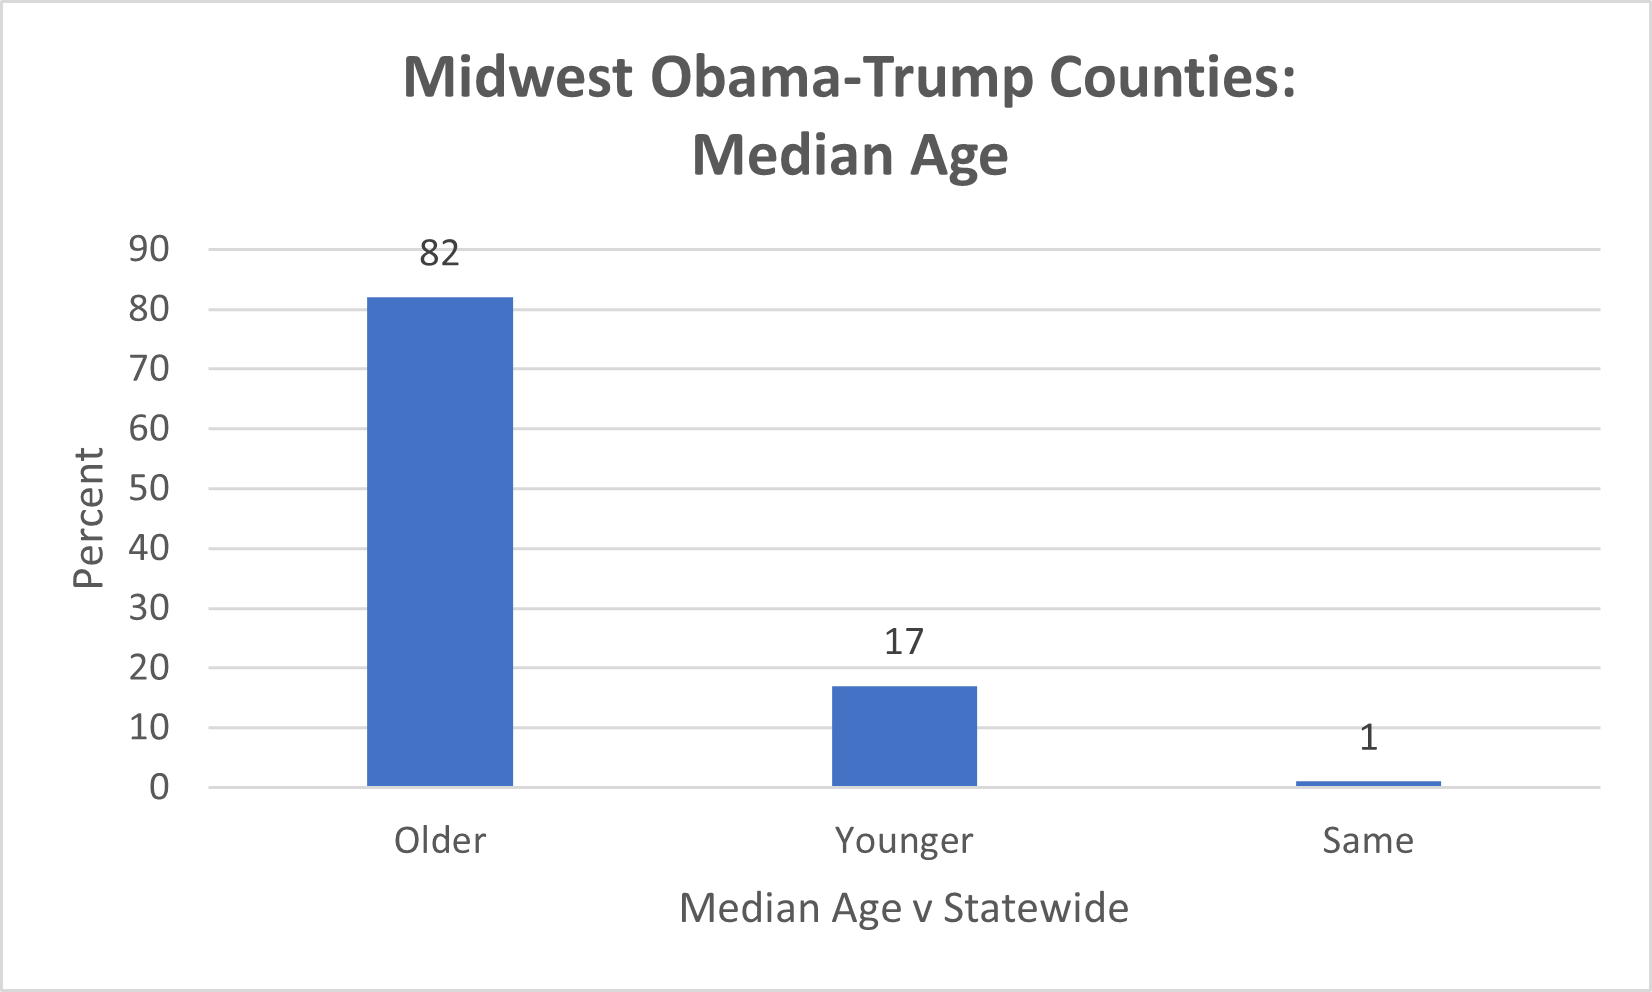 Bar graph of Midwest Obama-Trump Counties: Median Age